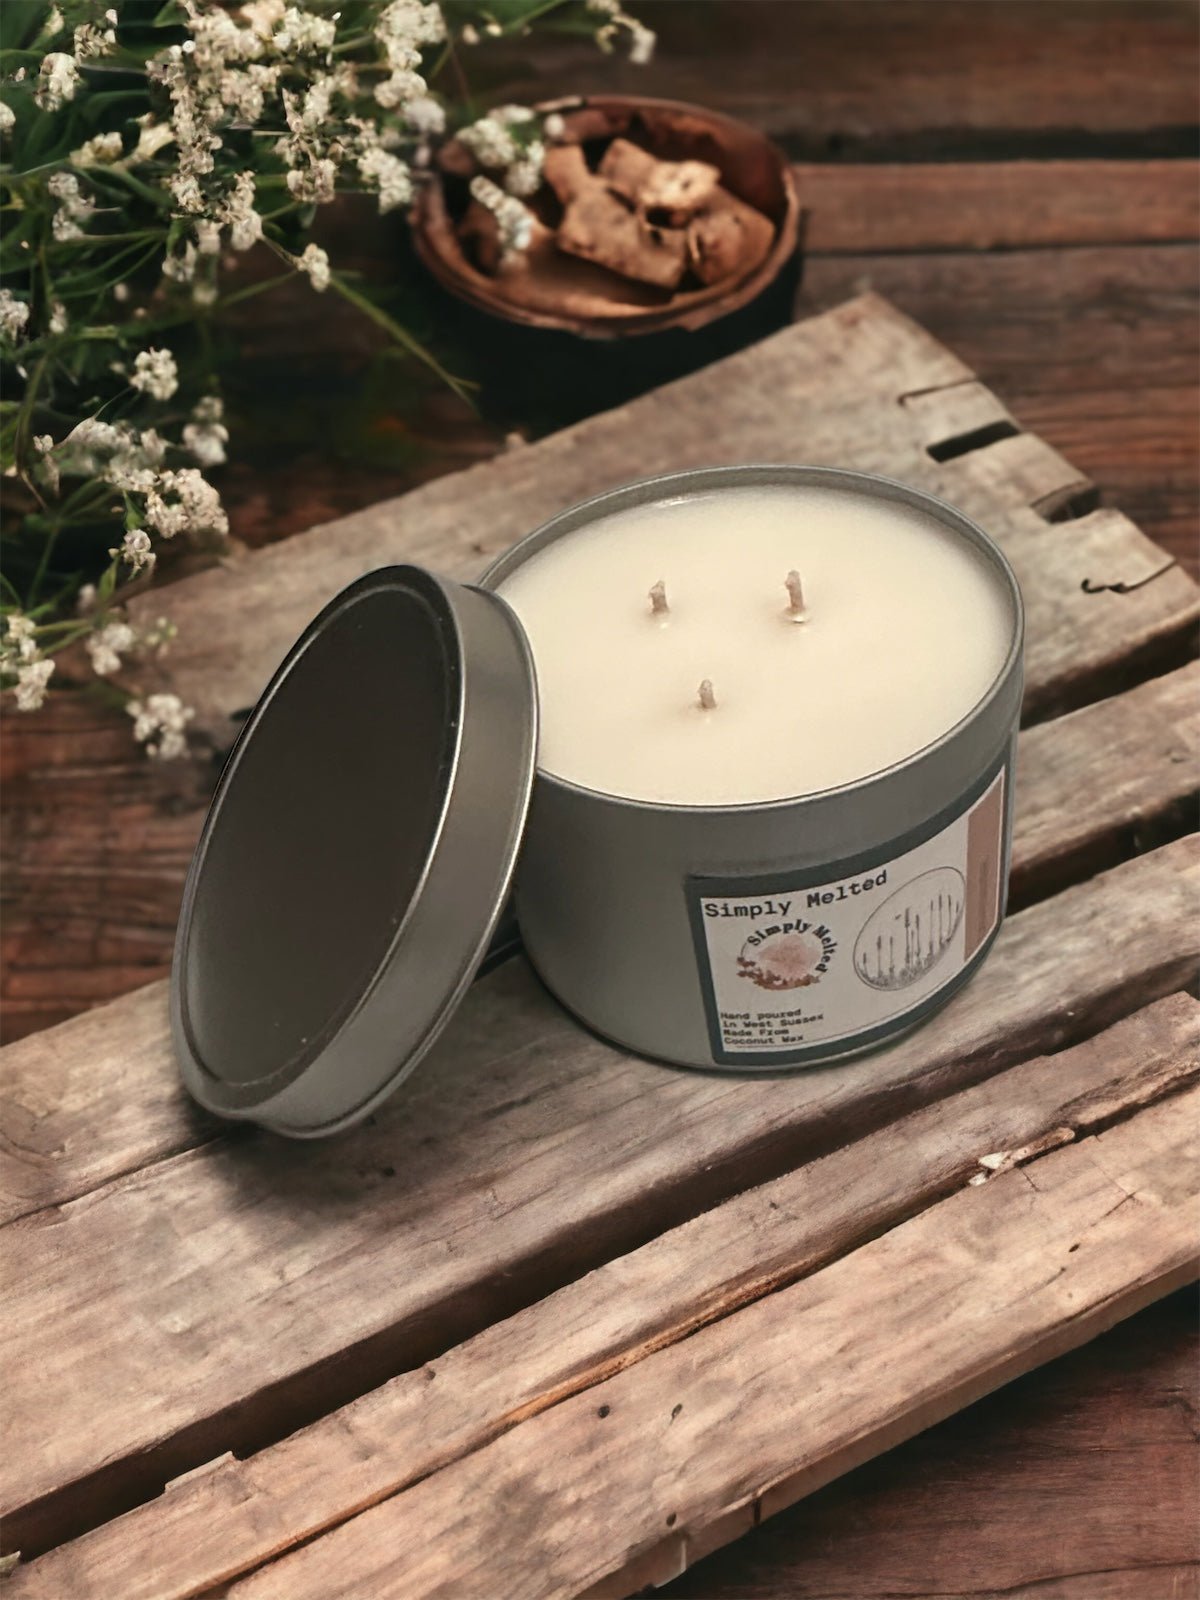 Lavender Three Wick Candle in a Tin - Simply Melted